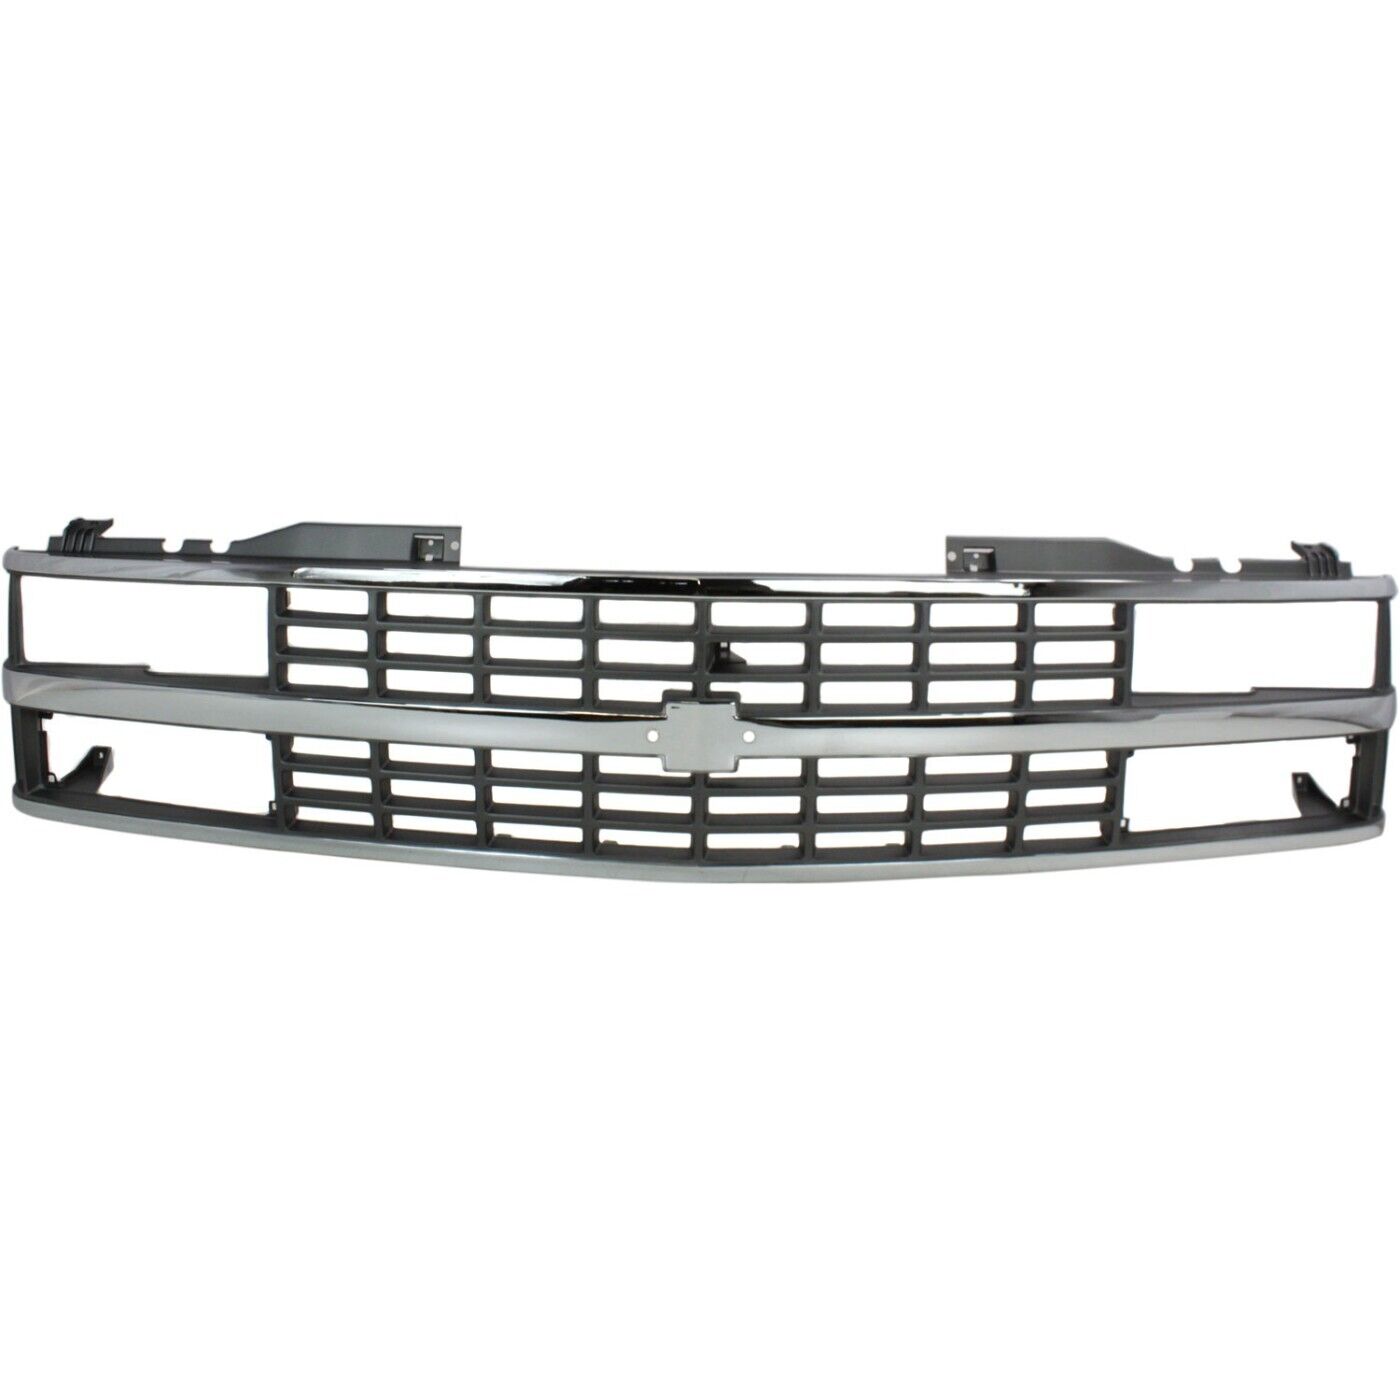 Grille For 1988-93 Chevy C K 1500 Chrome Shell With Black Insert Dual Headlight